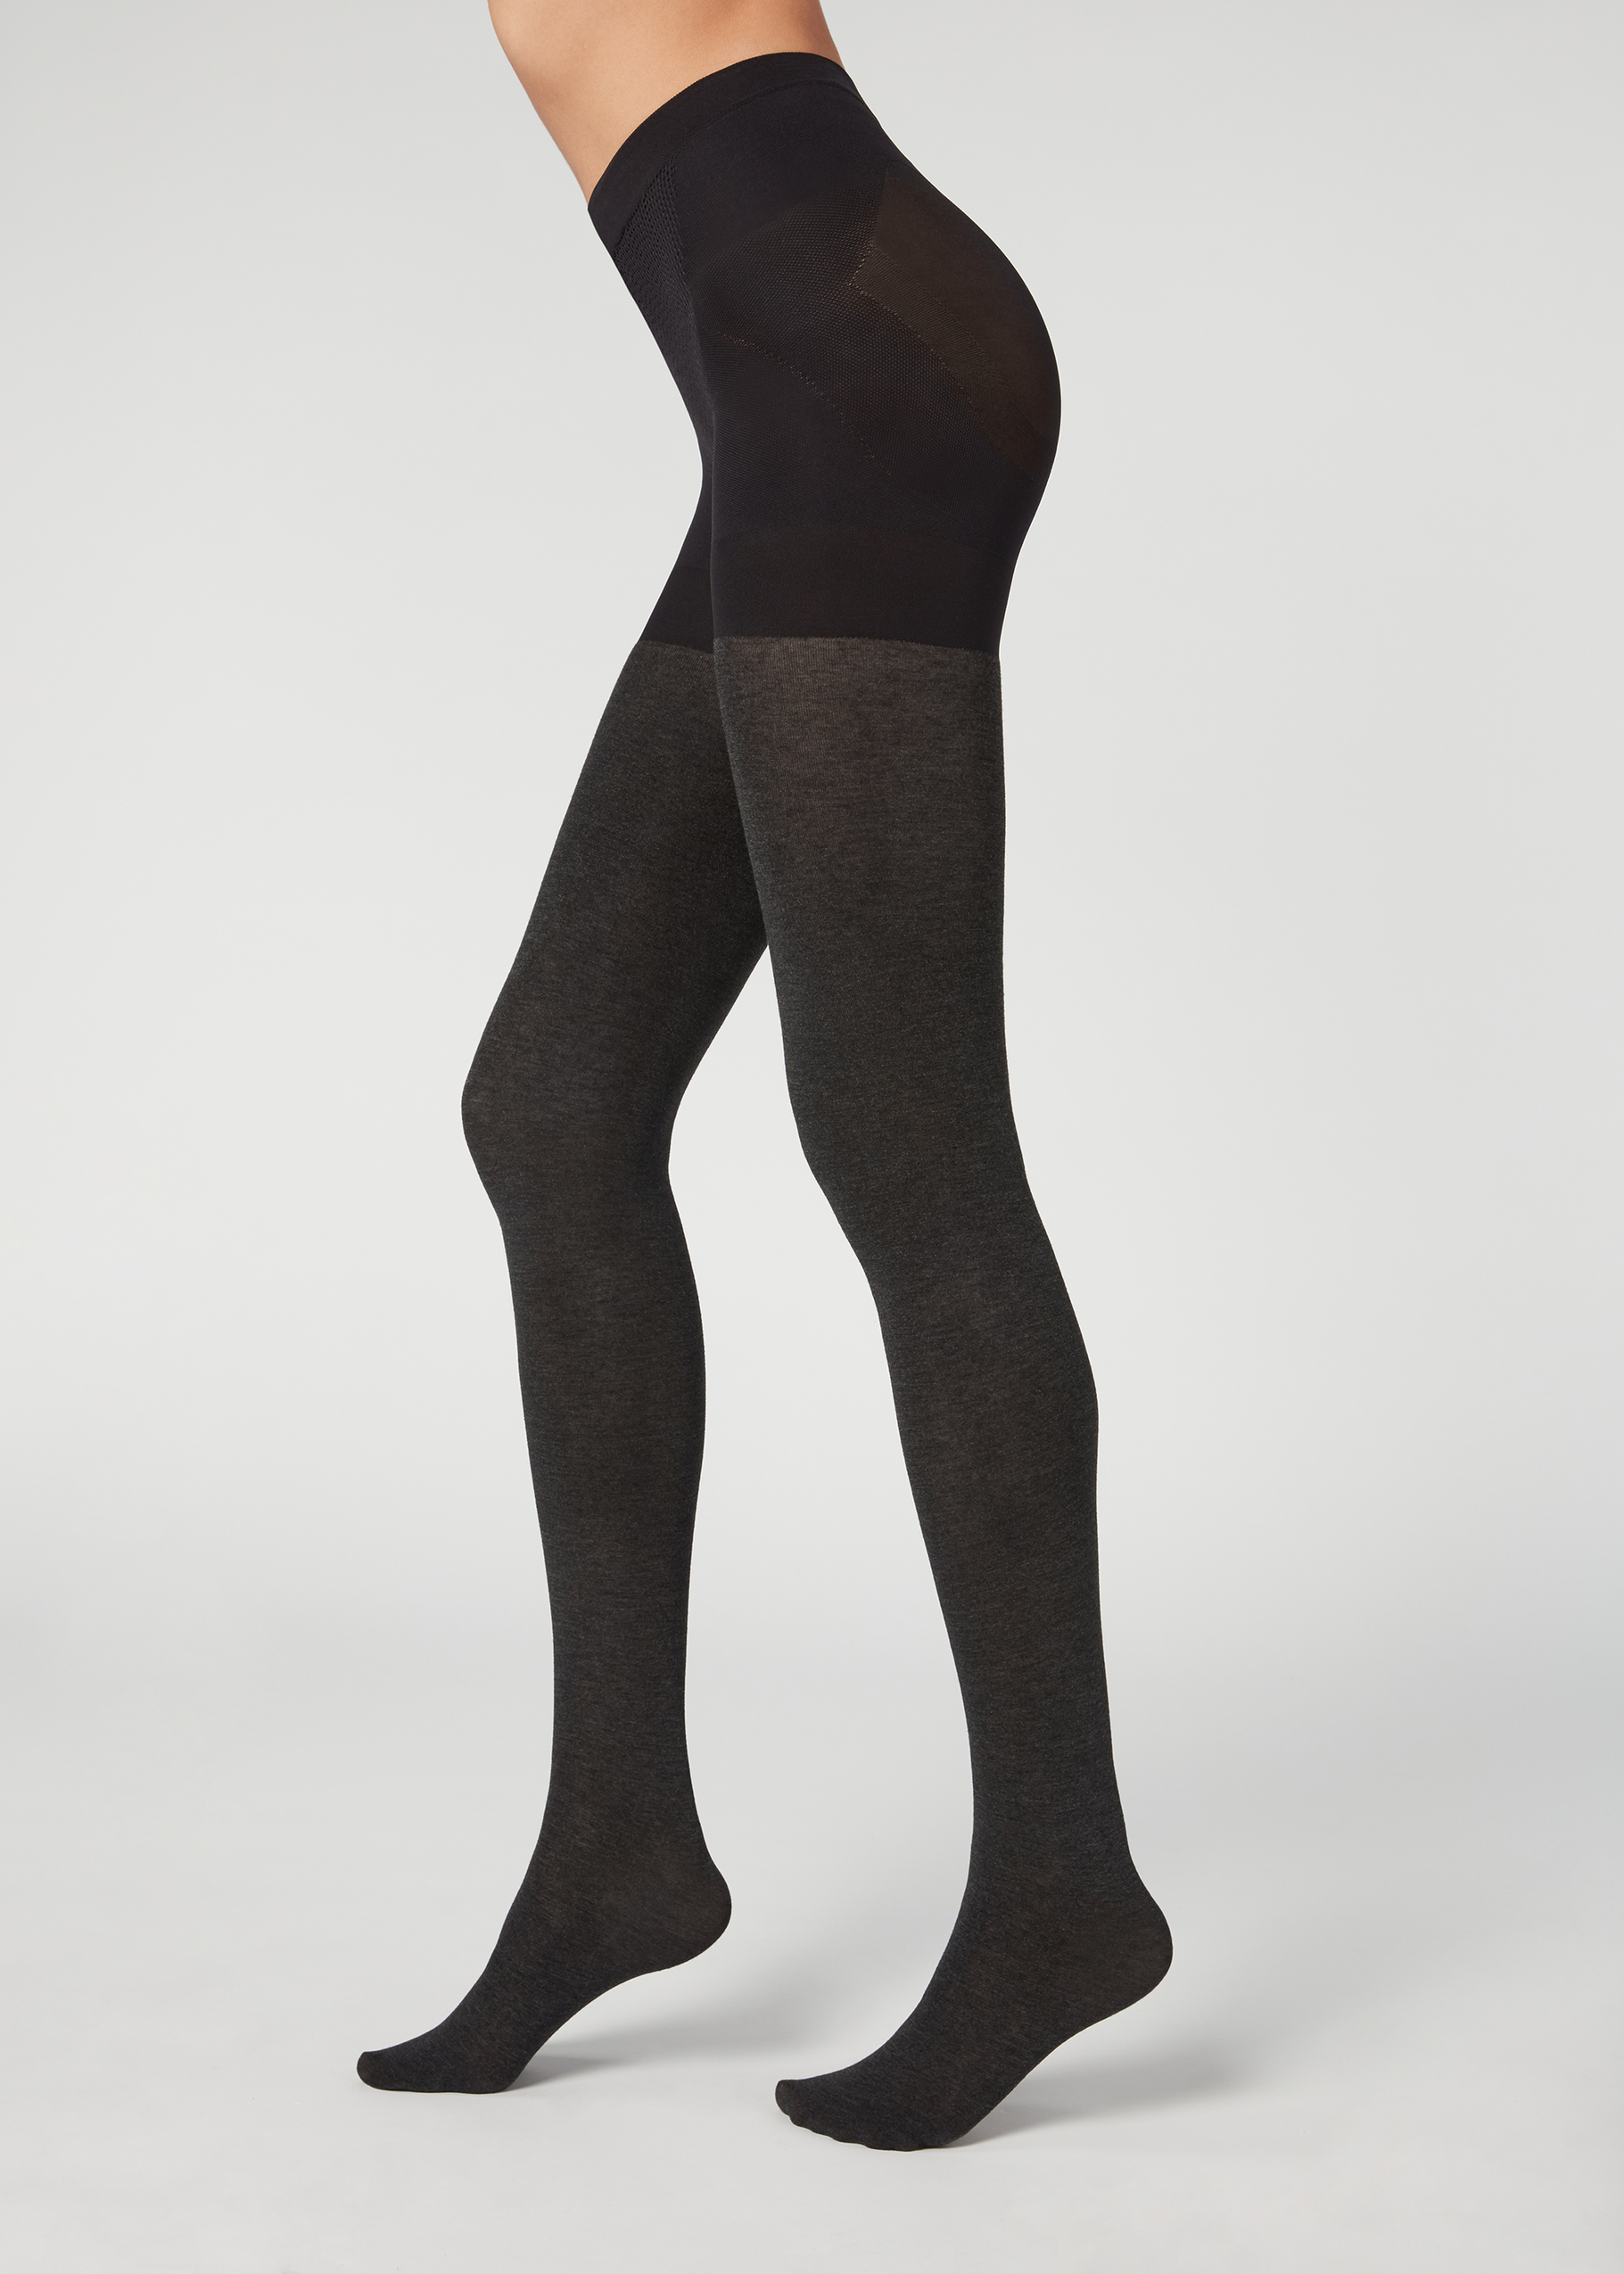 Total shaper cashmere tights - Calzedonia